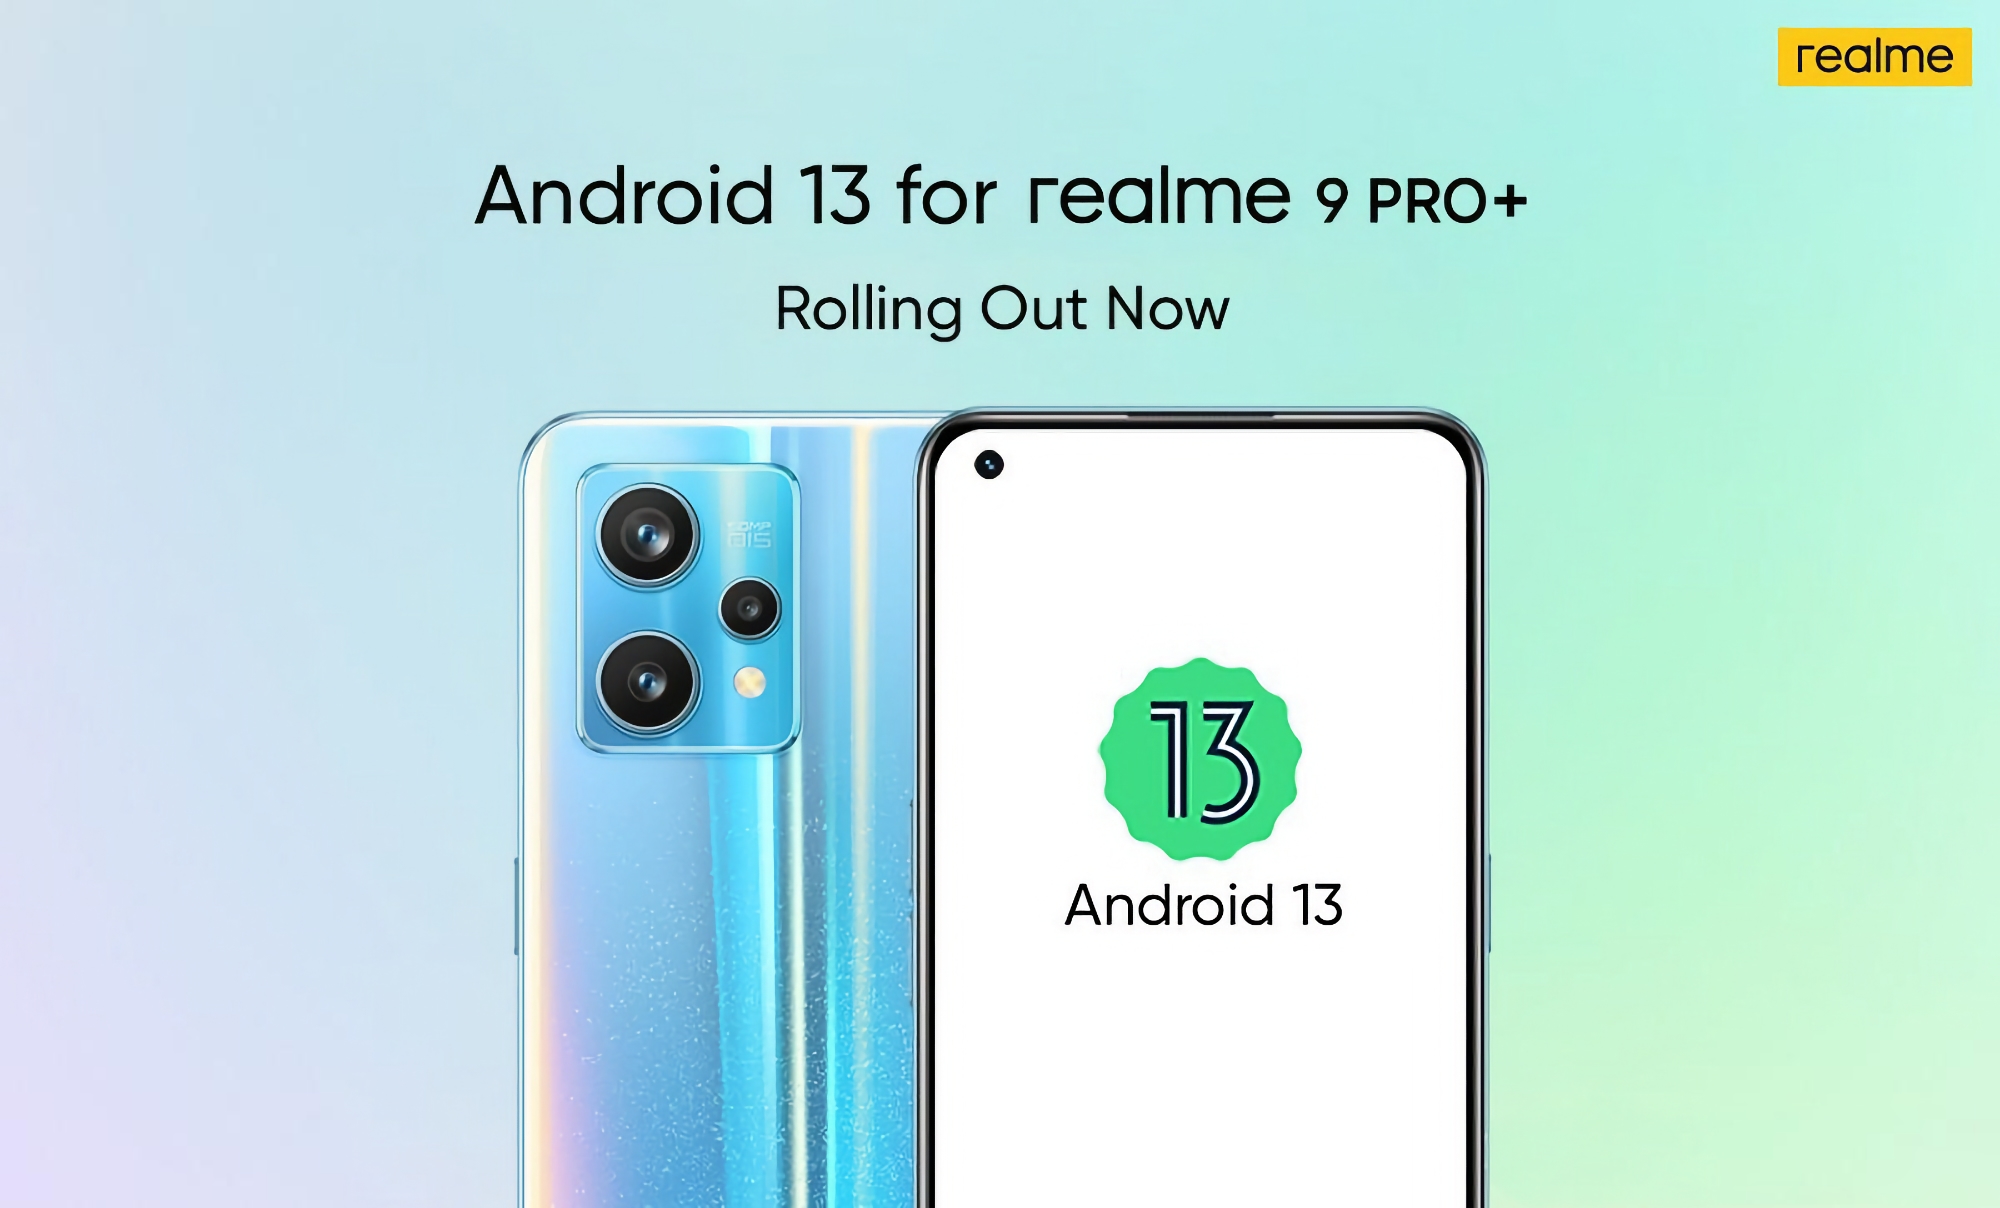 realme 9 Pro+ received an Android 13 update with the new realme UI 4.0